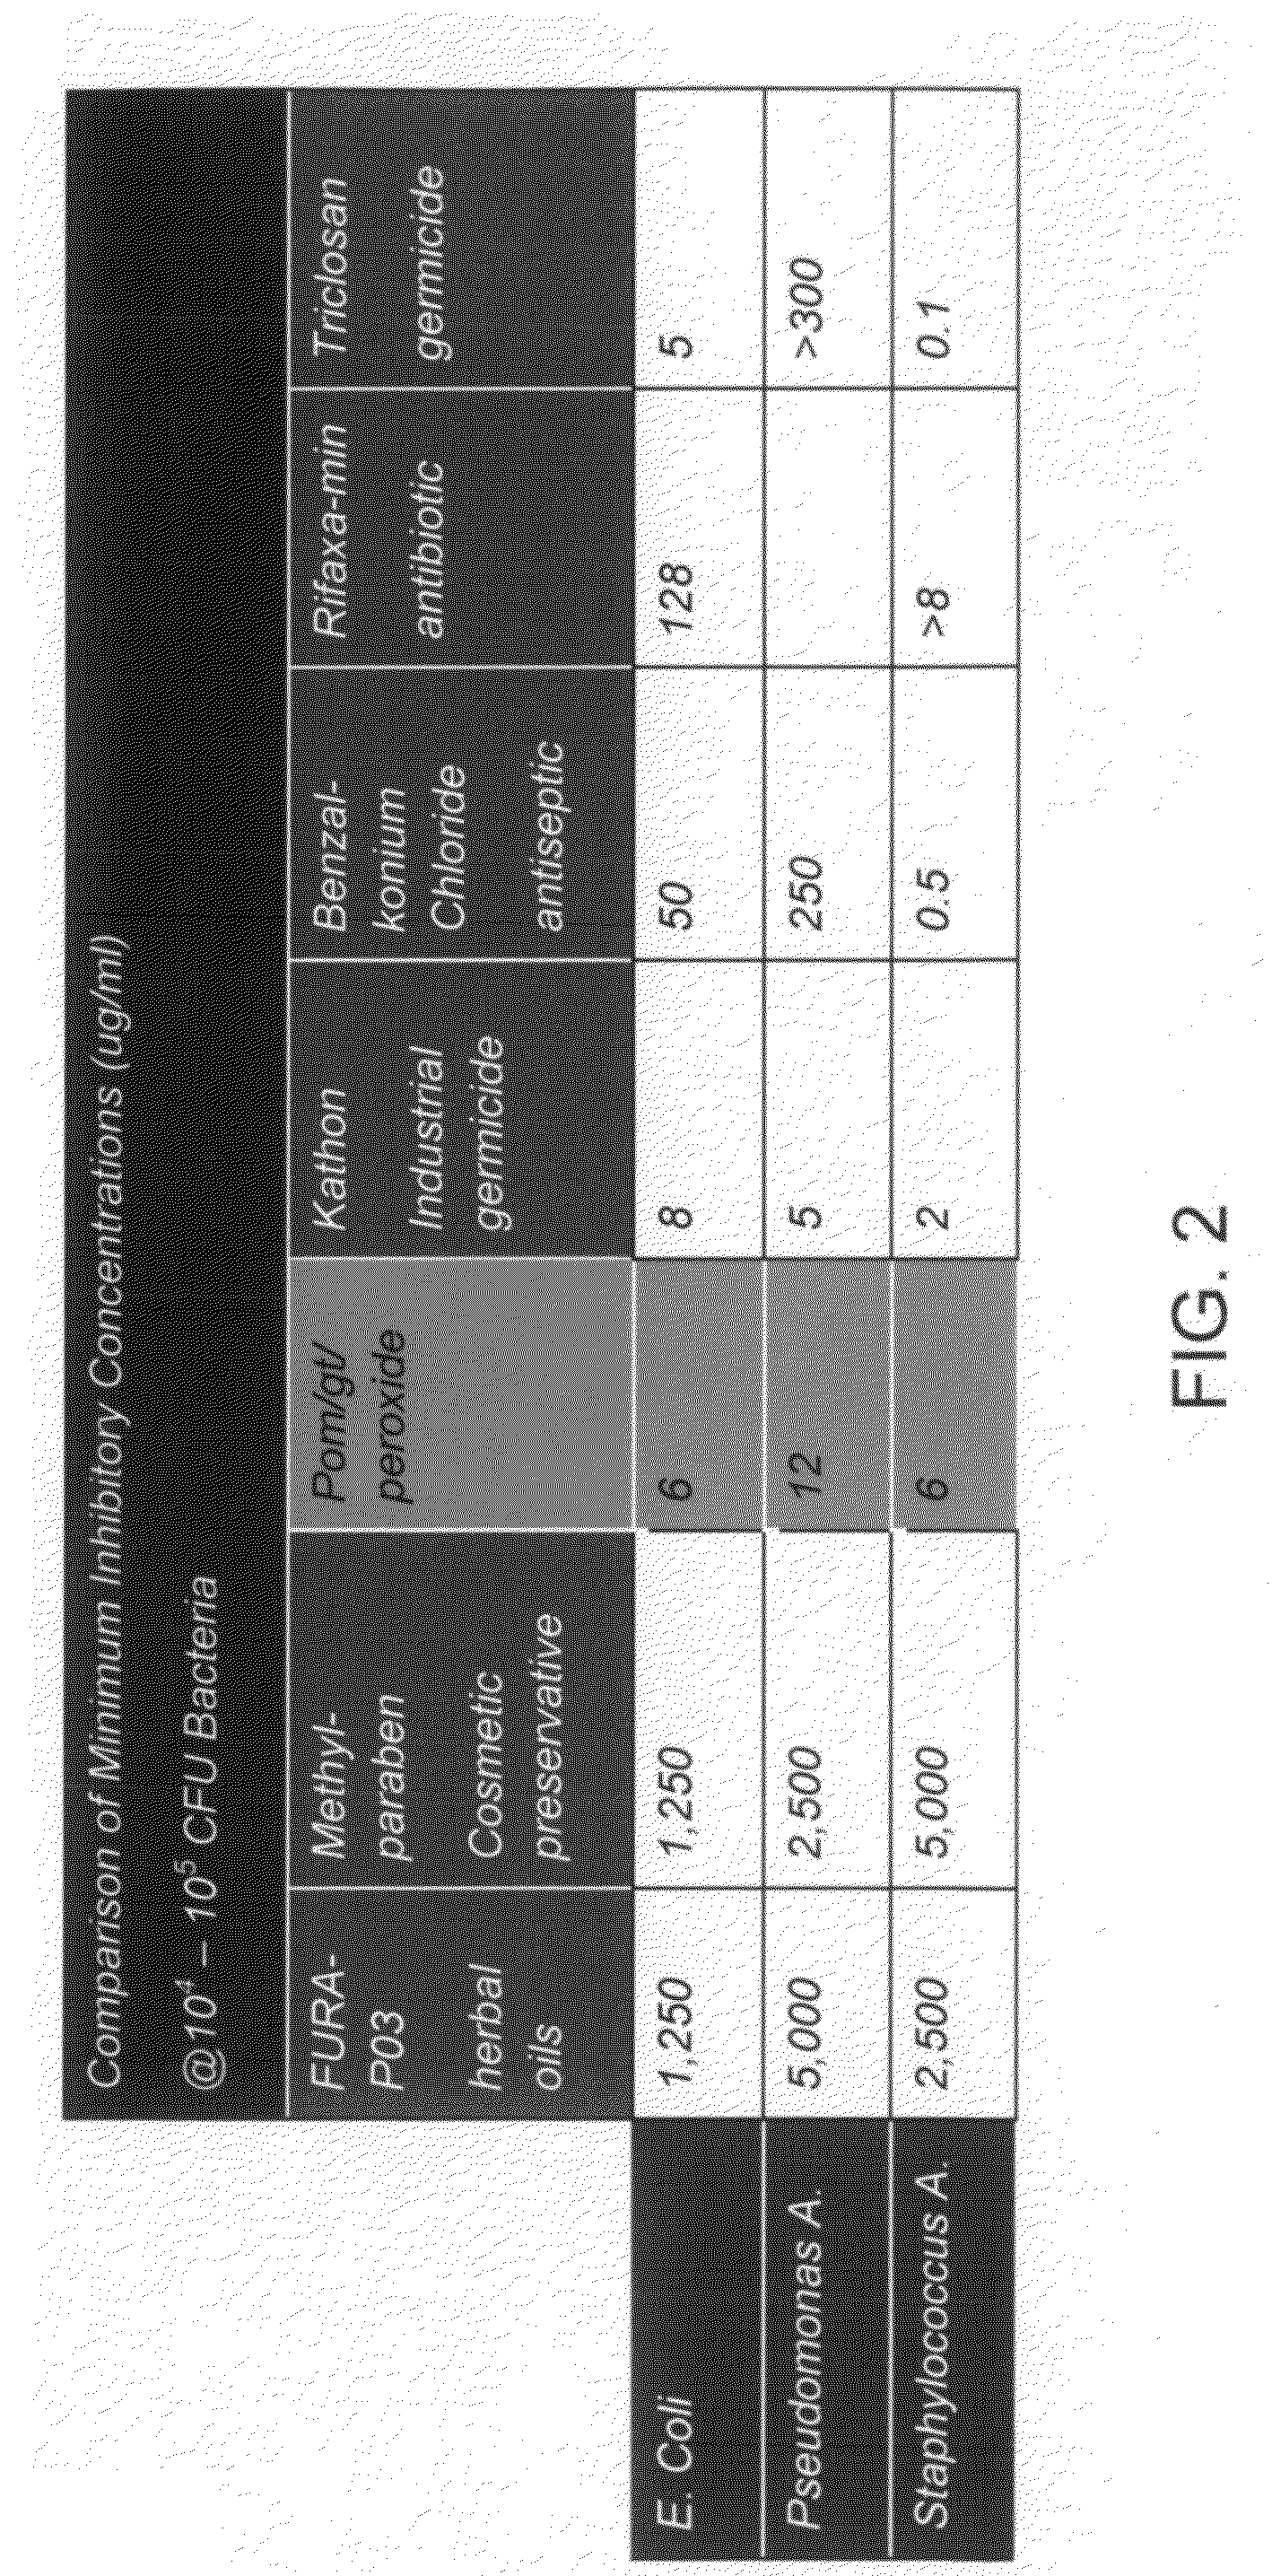 Treatment for gastrointestinal disorders using a selective, site-activated binding system